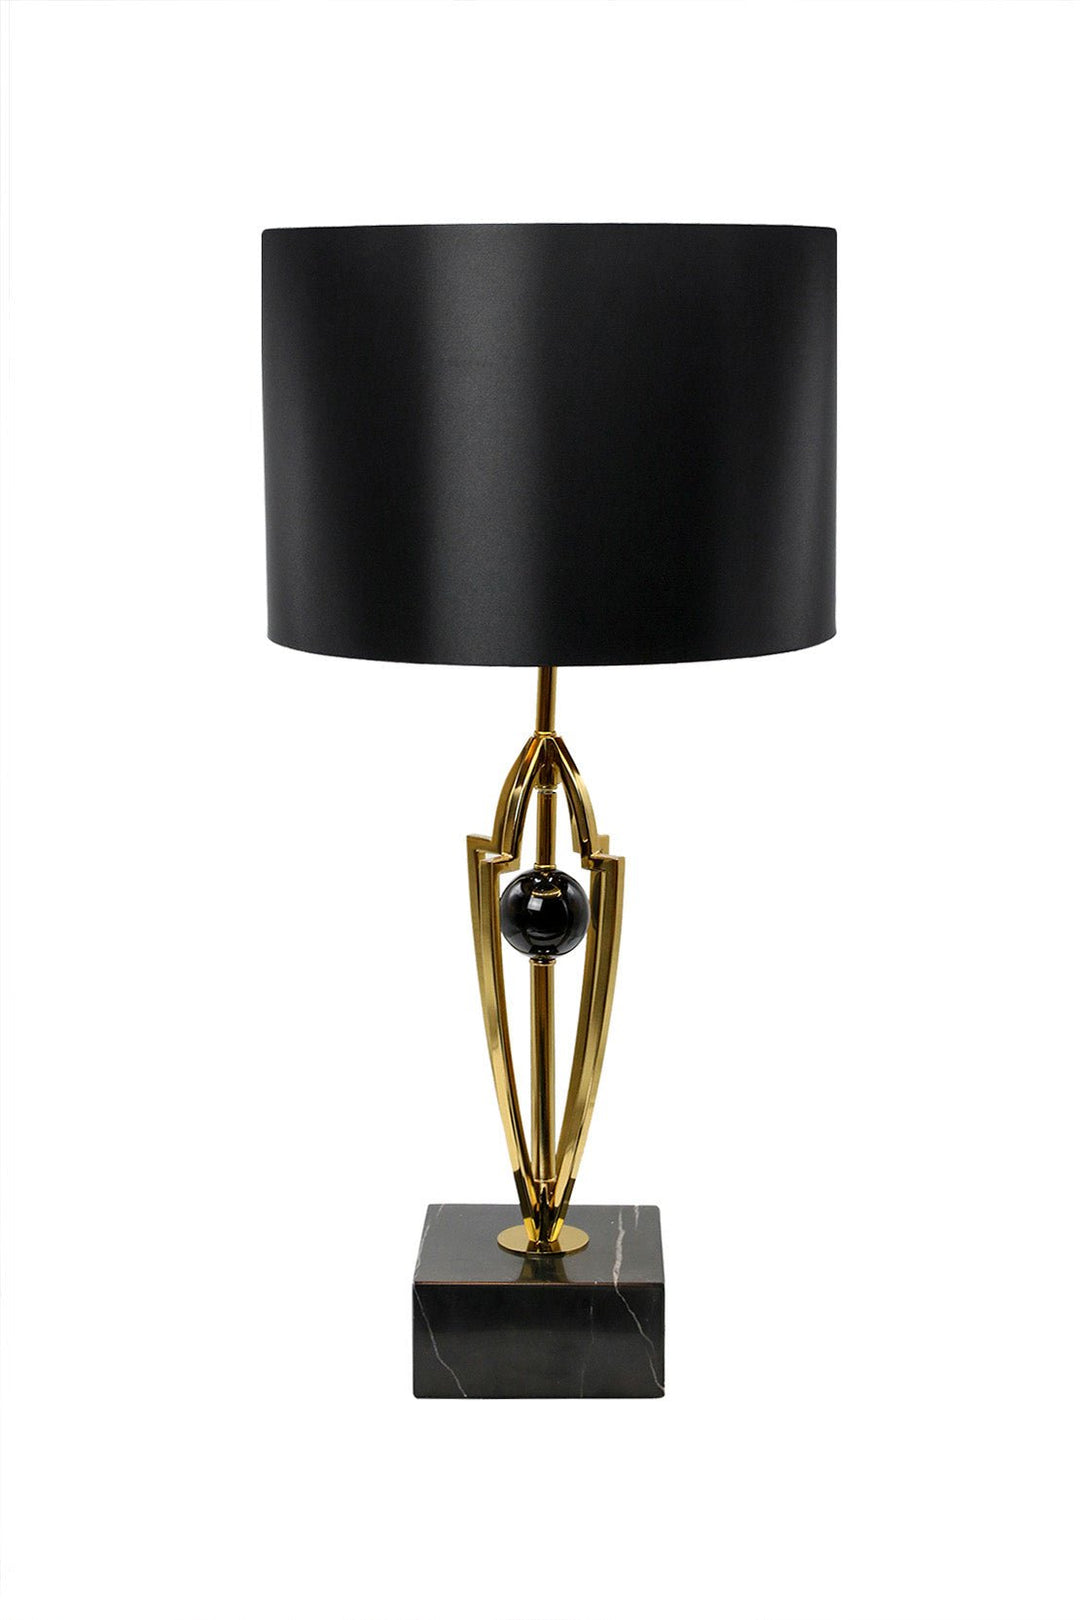 MODERN LAMP WITH BLACK BALL - V Surfaces